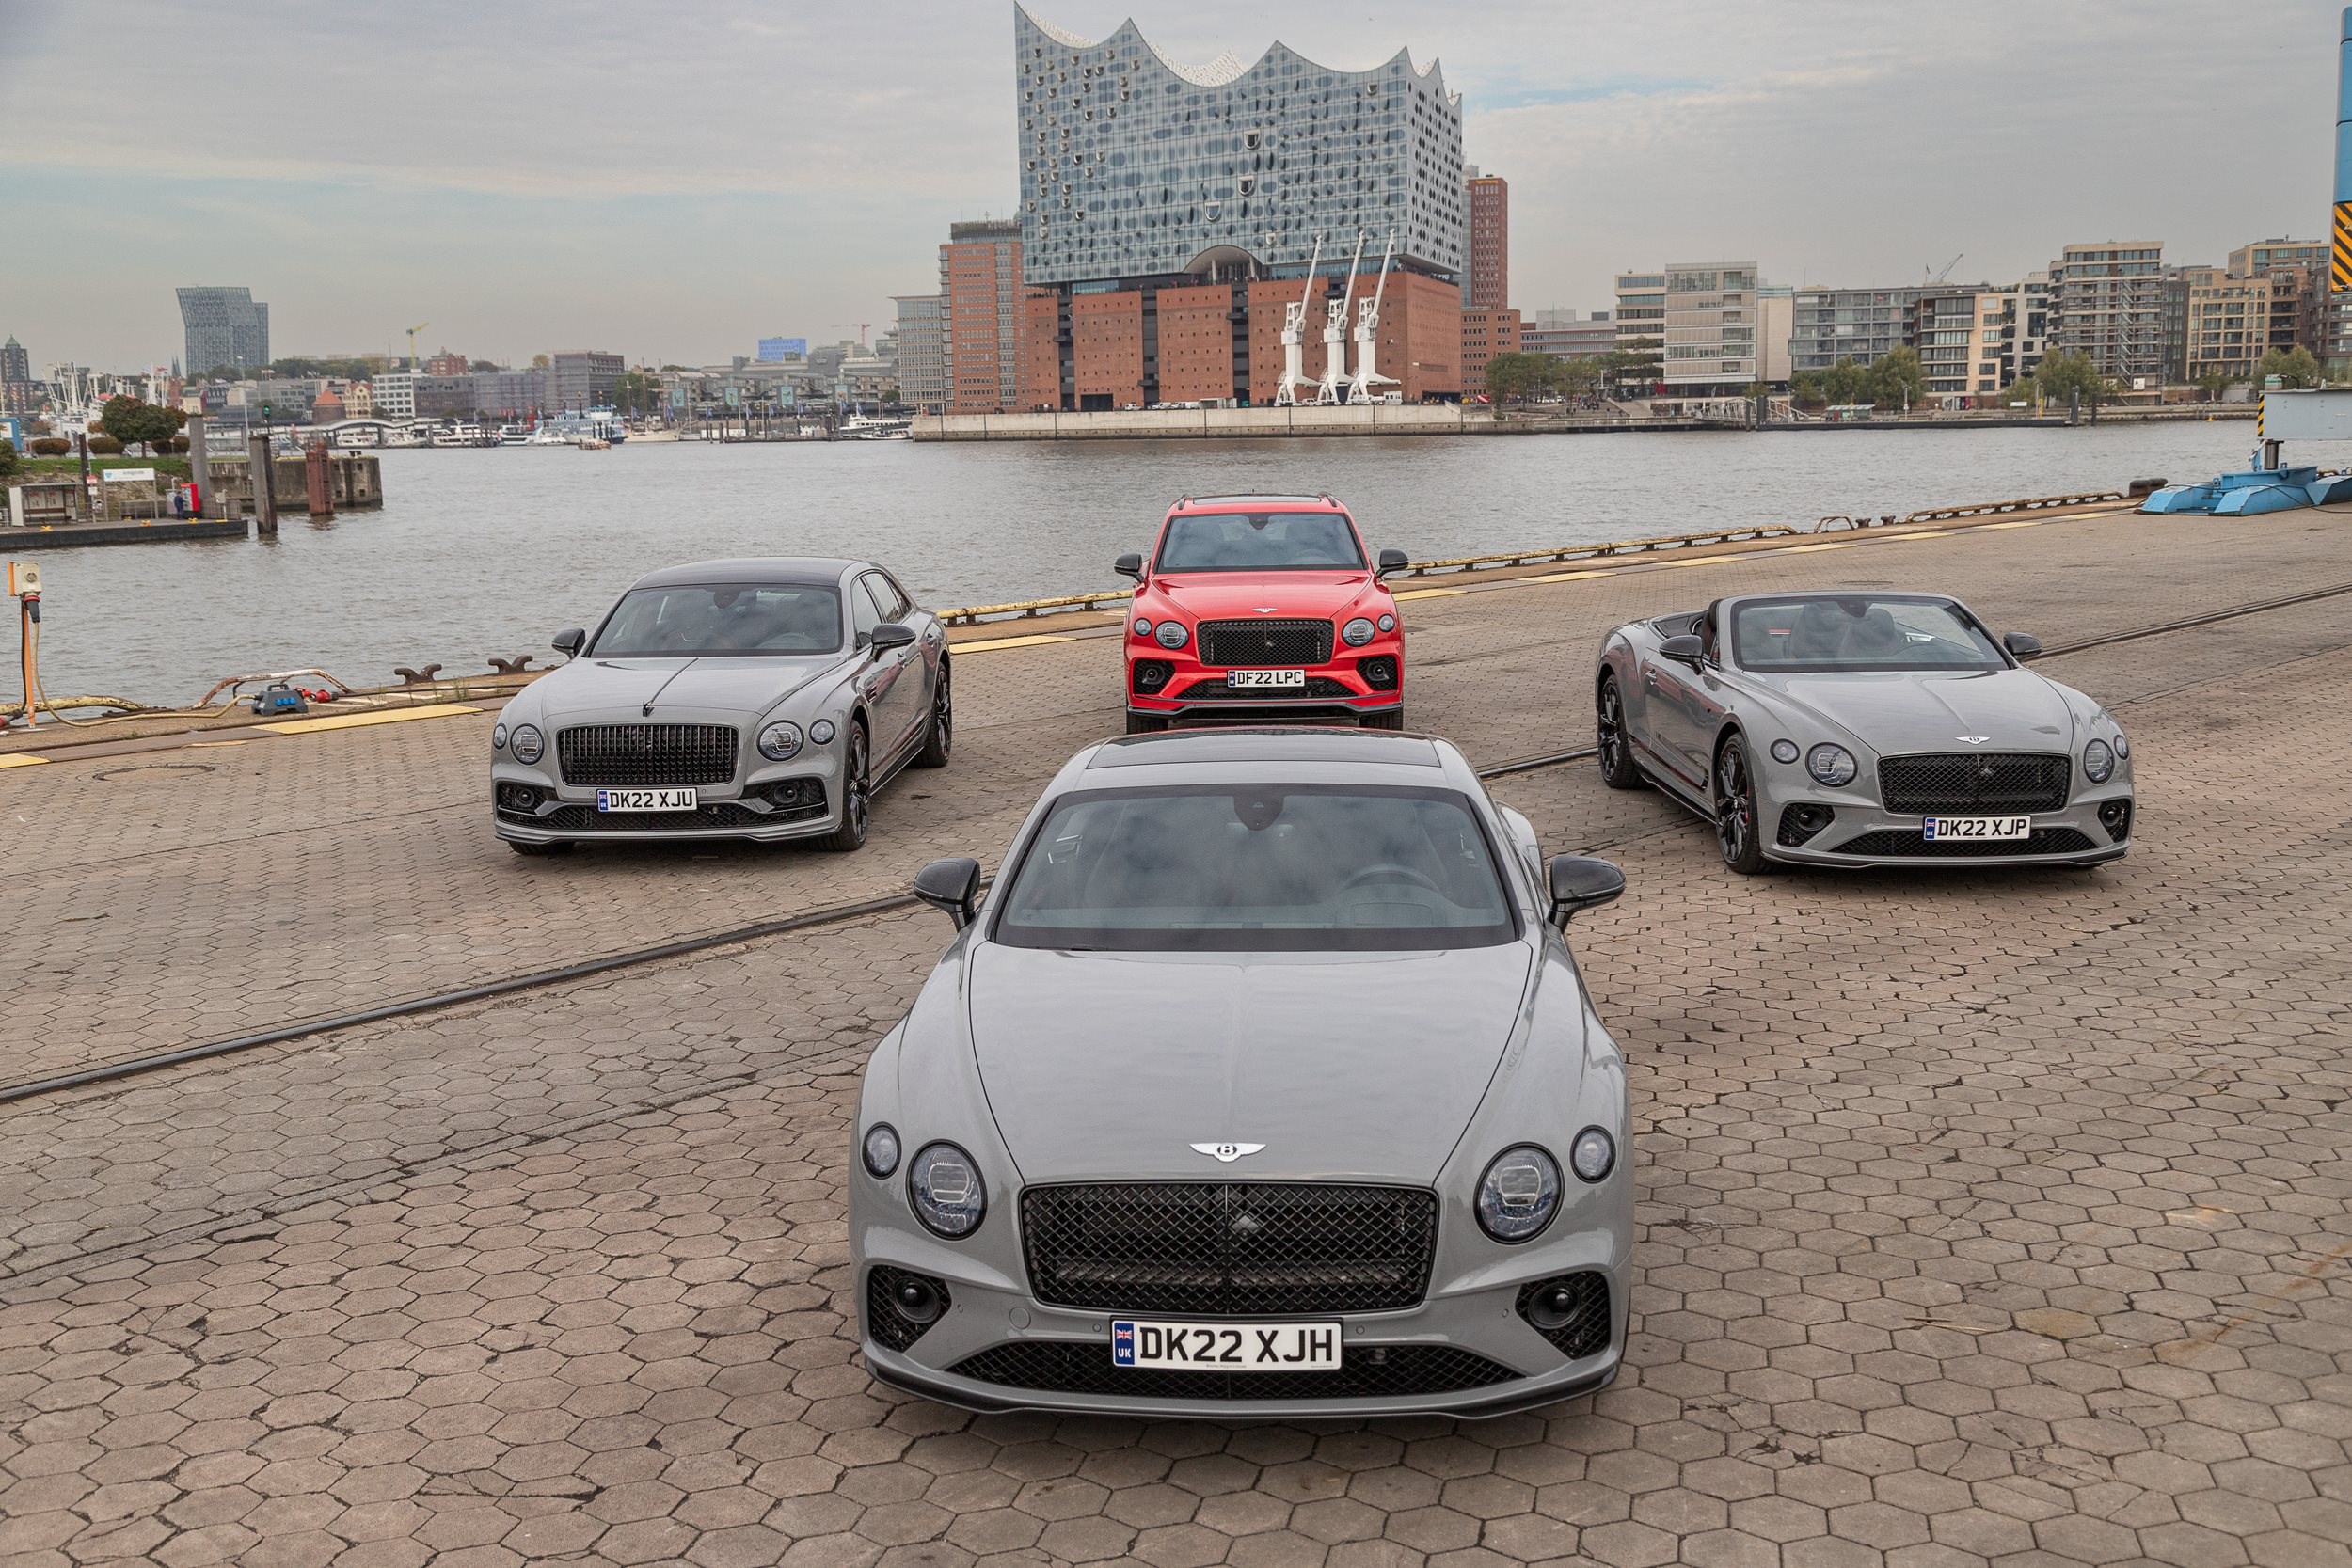 Colour , Silver/Grey Colour , Red Image type , Static Angle , Front General , Performance General , Innovation General , Craftsmanship S V8 Current Models , Range Current Models , Flying Spur , Flying Spur S Current Models , Continental GT Convertible , Continental GT Convertible S Current Models , Continental GT , Continental GT S Current Models , Bentayga , Bentayga S 